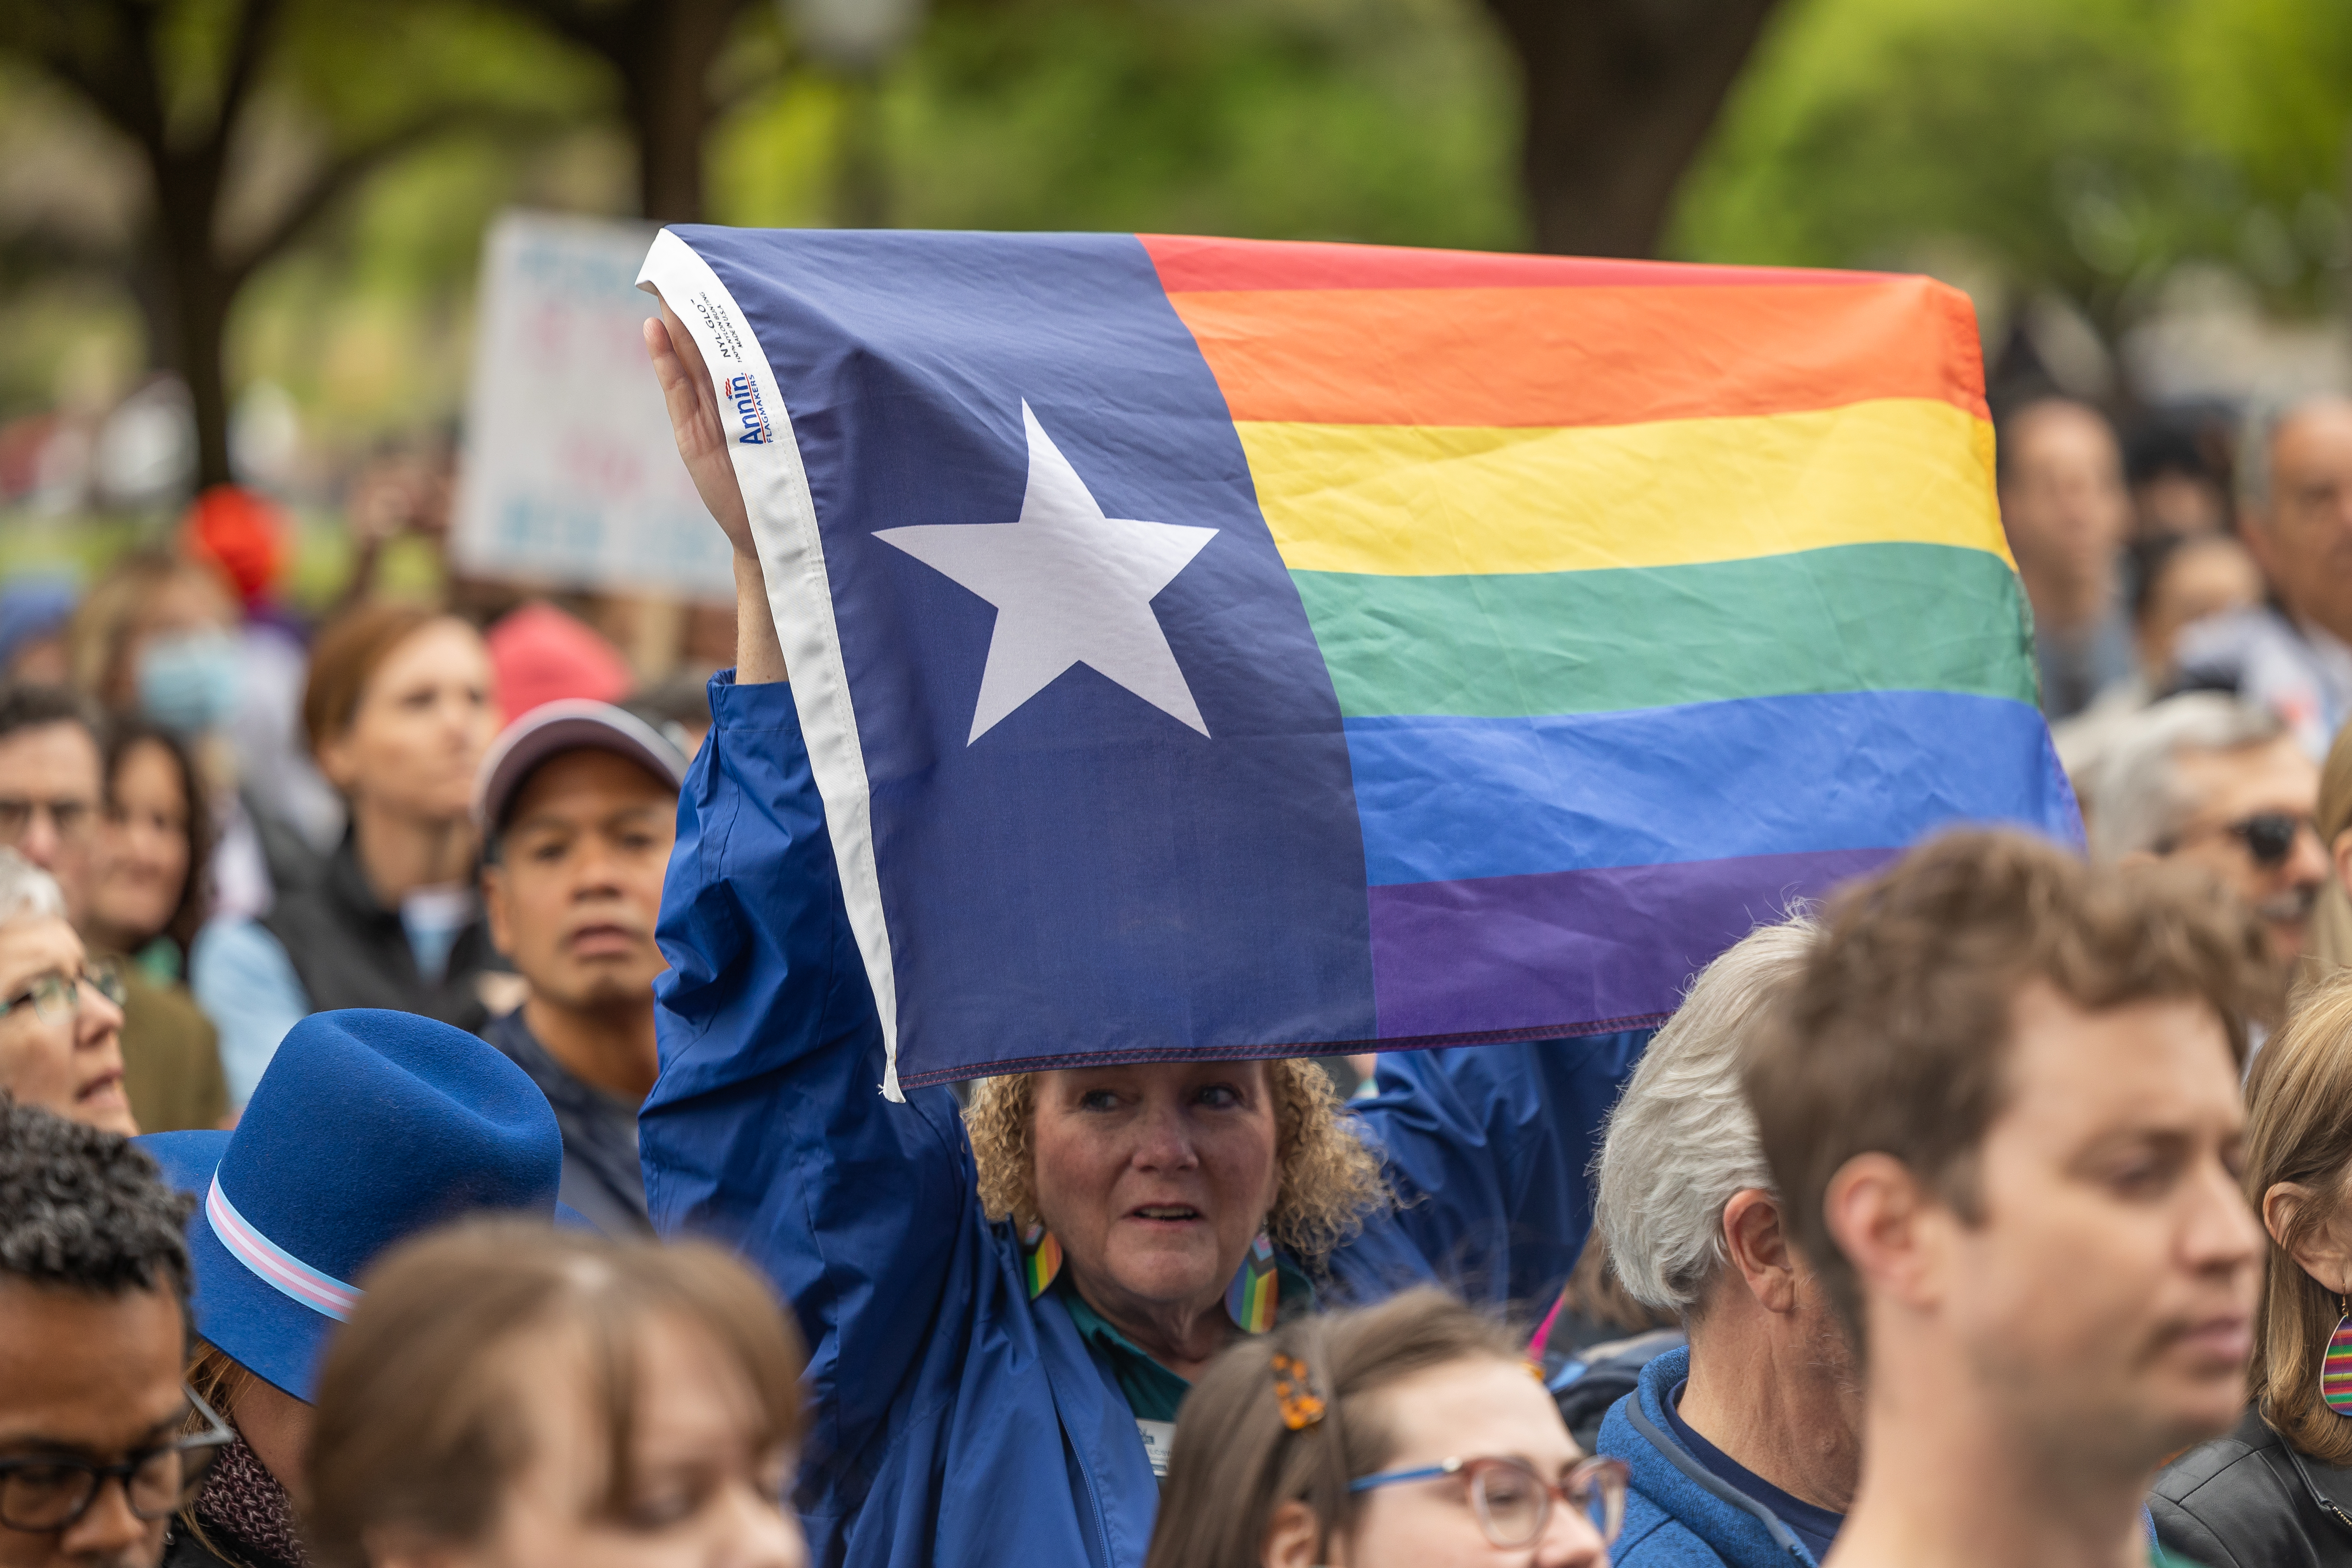 A crowd of people, some holding signs, with one in the center holding up a rainbow Texas flag.